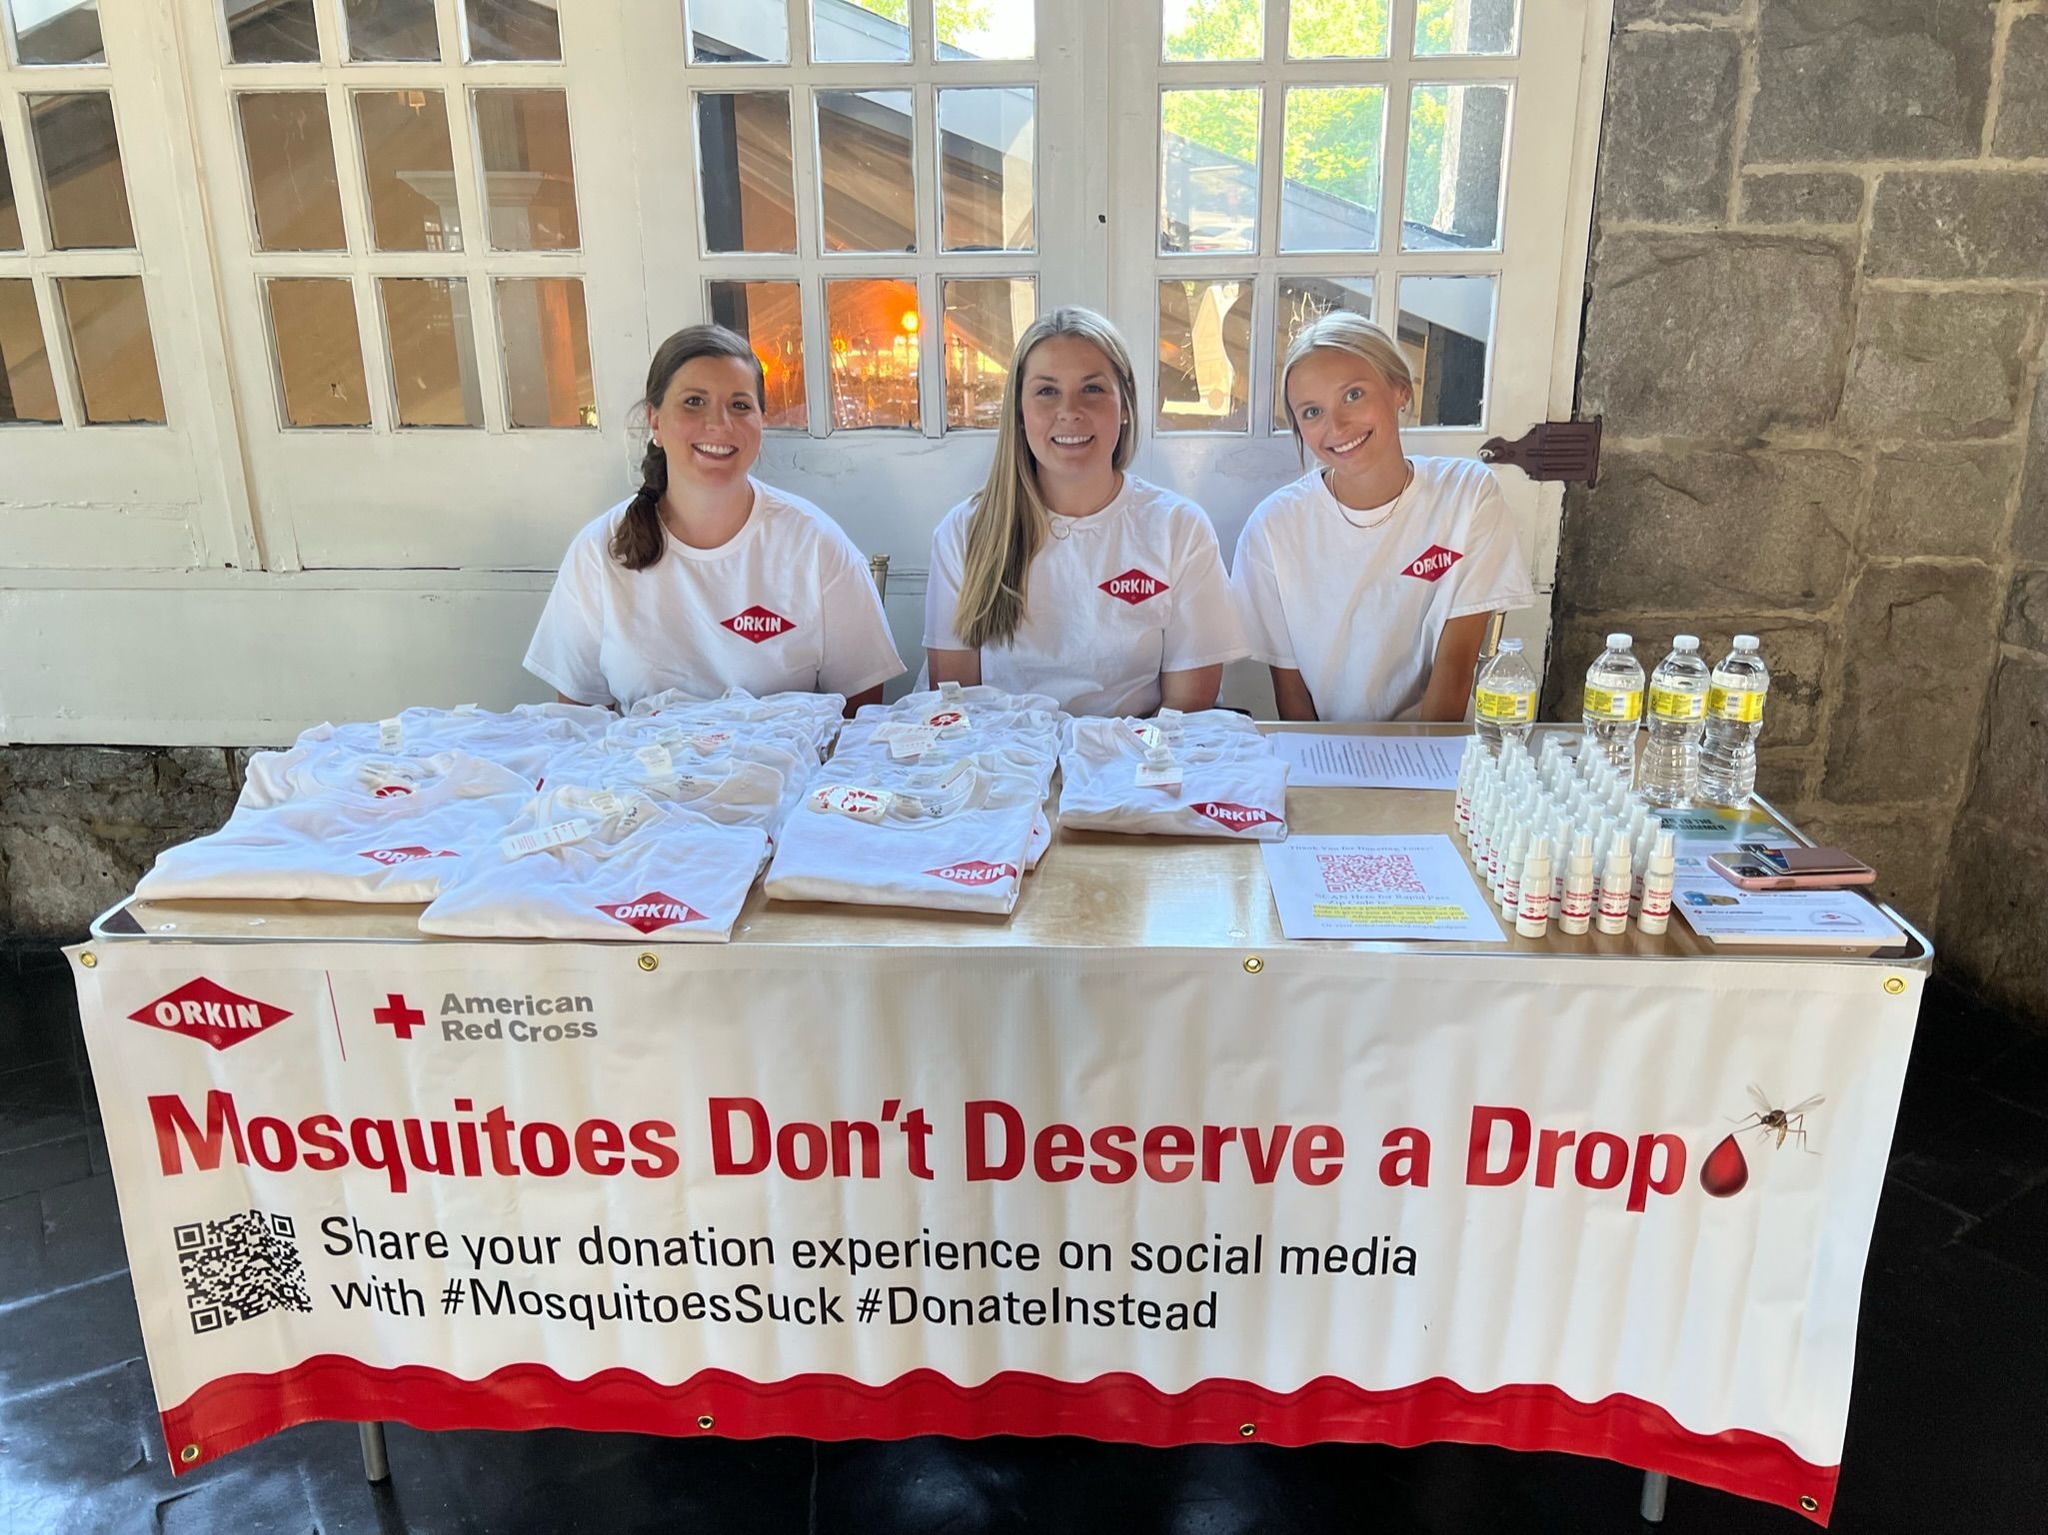 Orkin Atlanta 2022 Blood Drive. Mosquitoes Don't Deserve a Drop decorated table with three smiling Orkin Employees. 